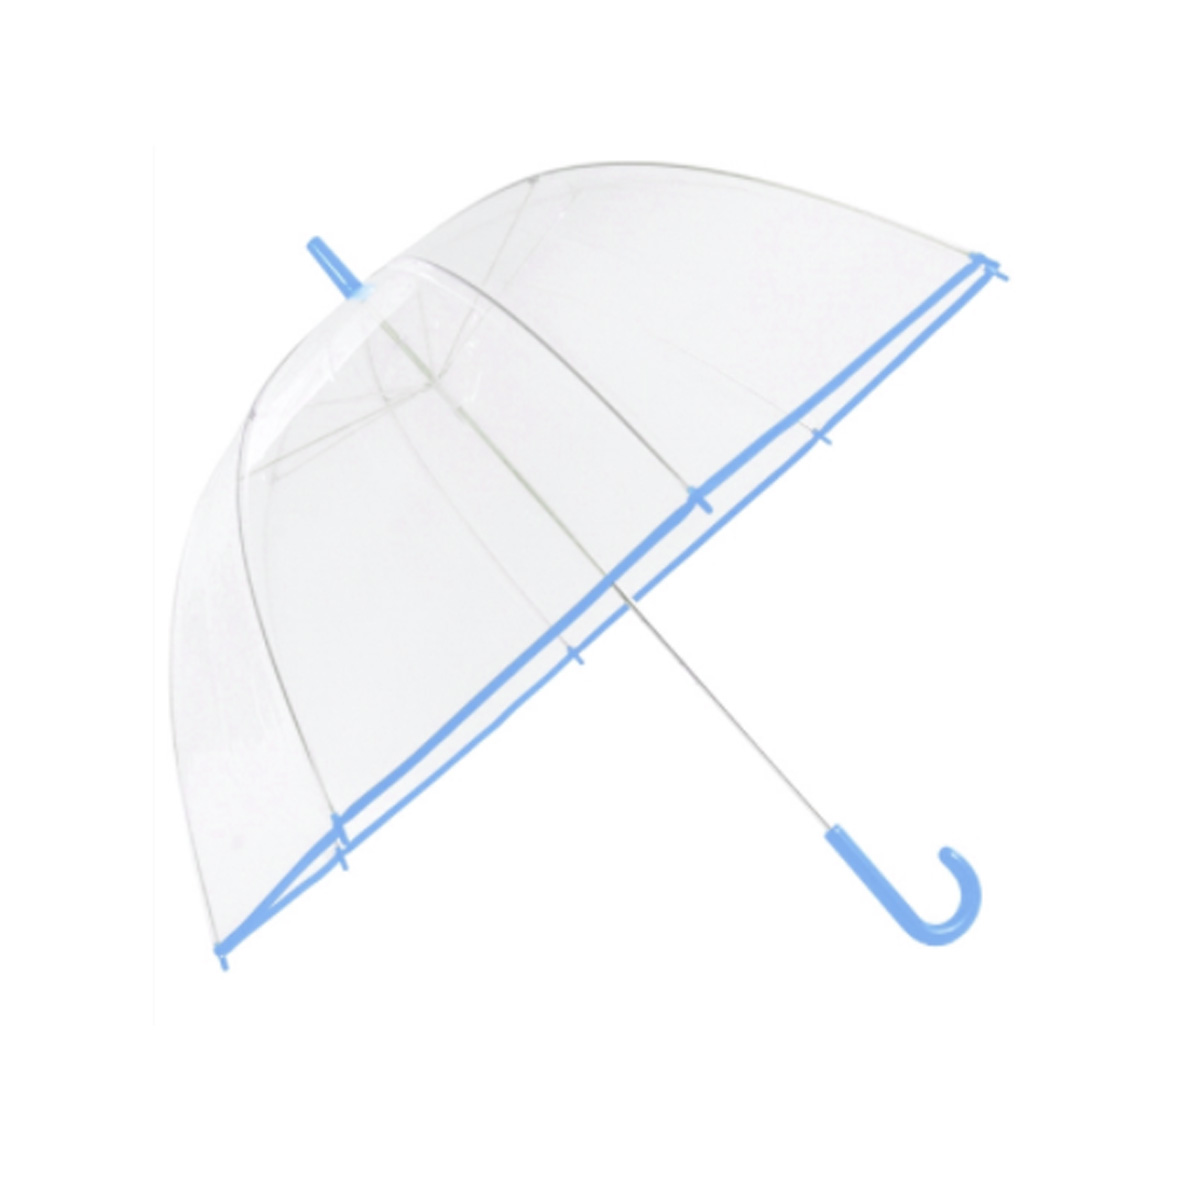 GL-AAA1205 23inch Transparent Dome Umbrella with Color Trim